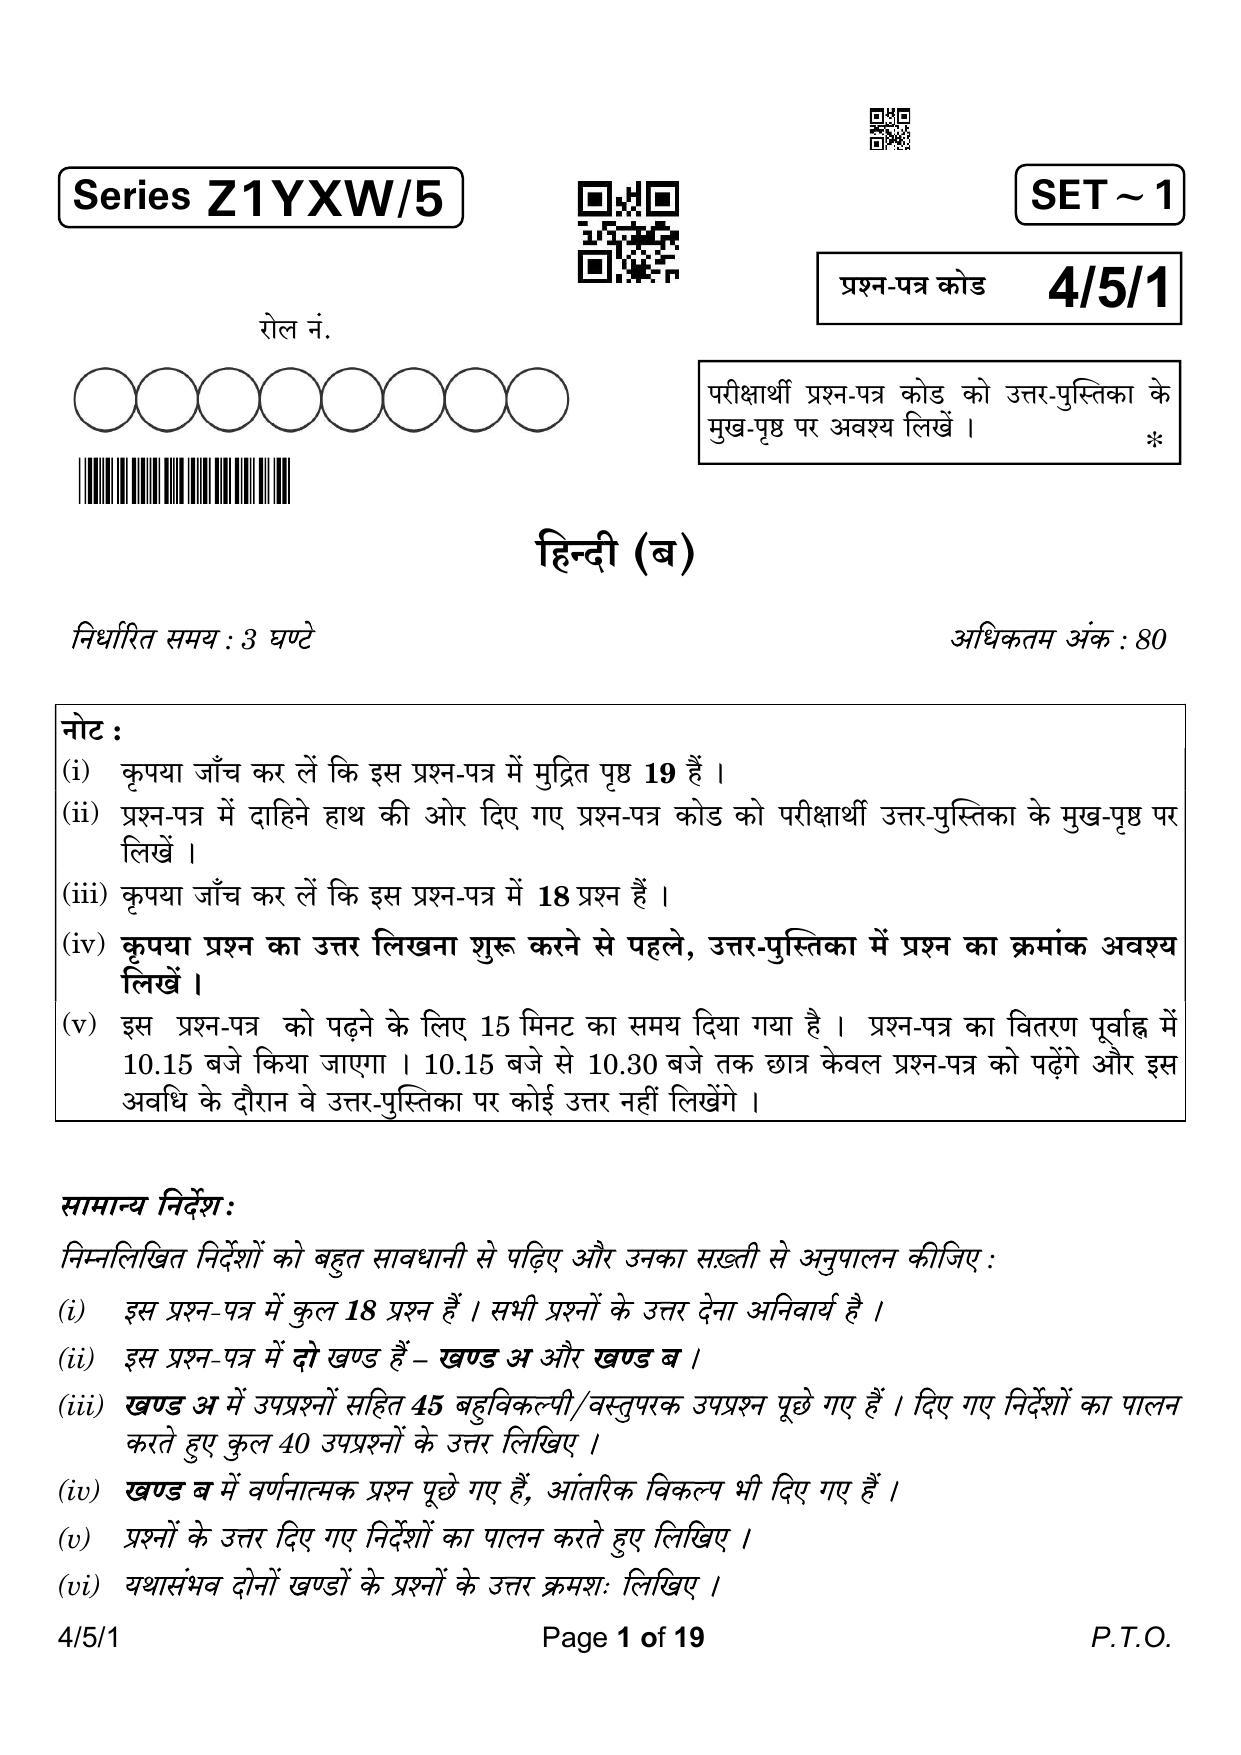 CBSE Class 10 4-5-1 Hindi B 2023 Question Paper - Page 1